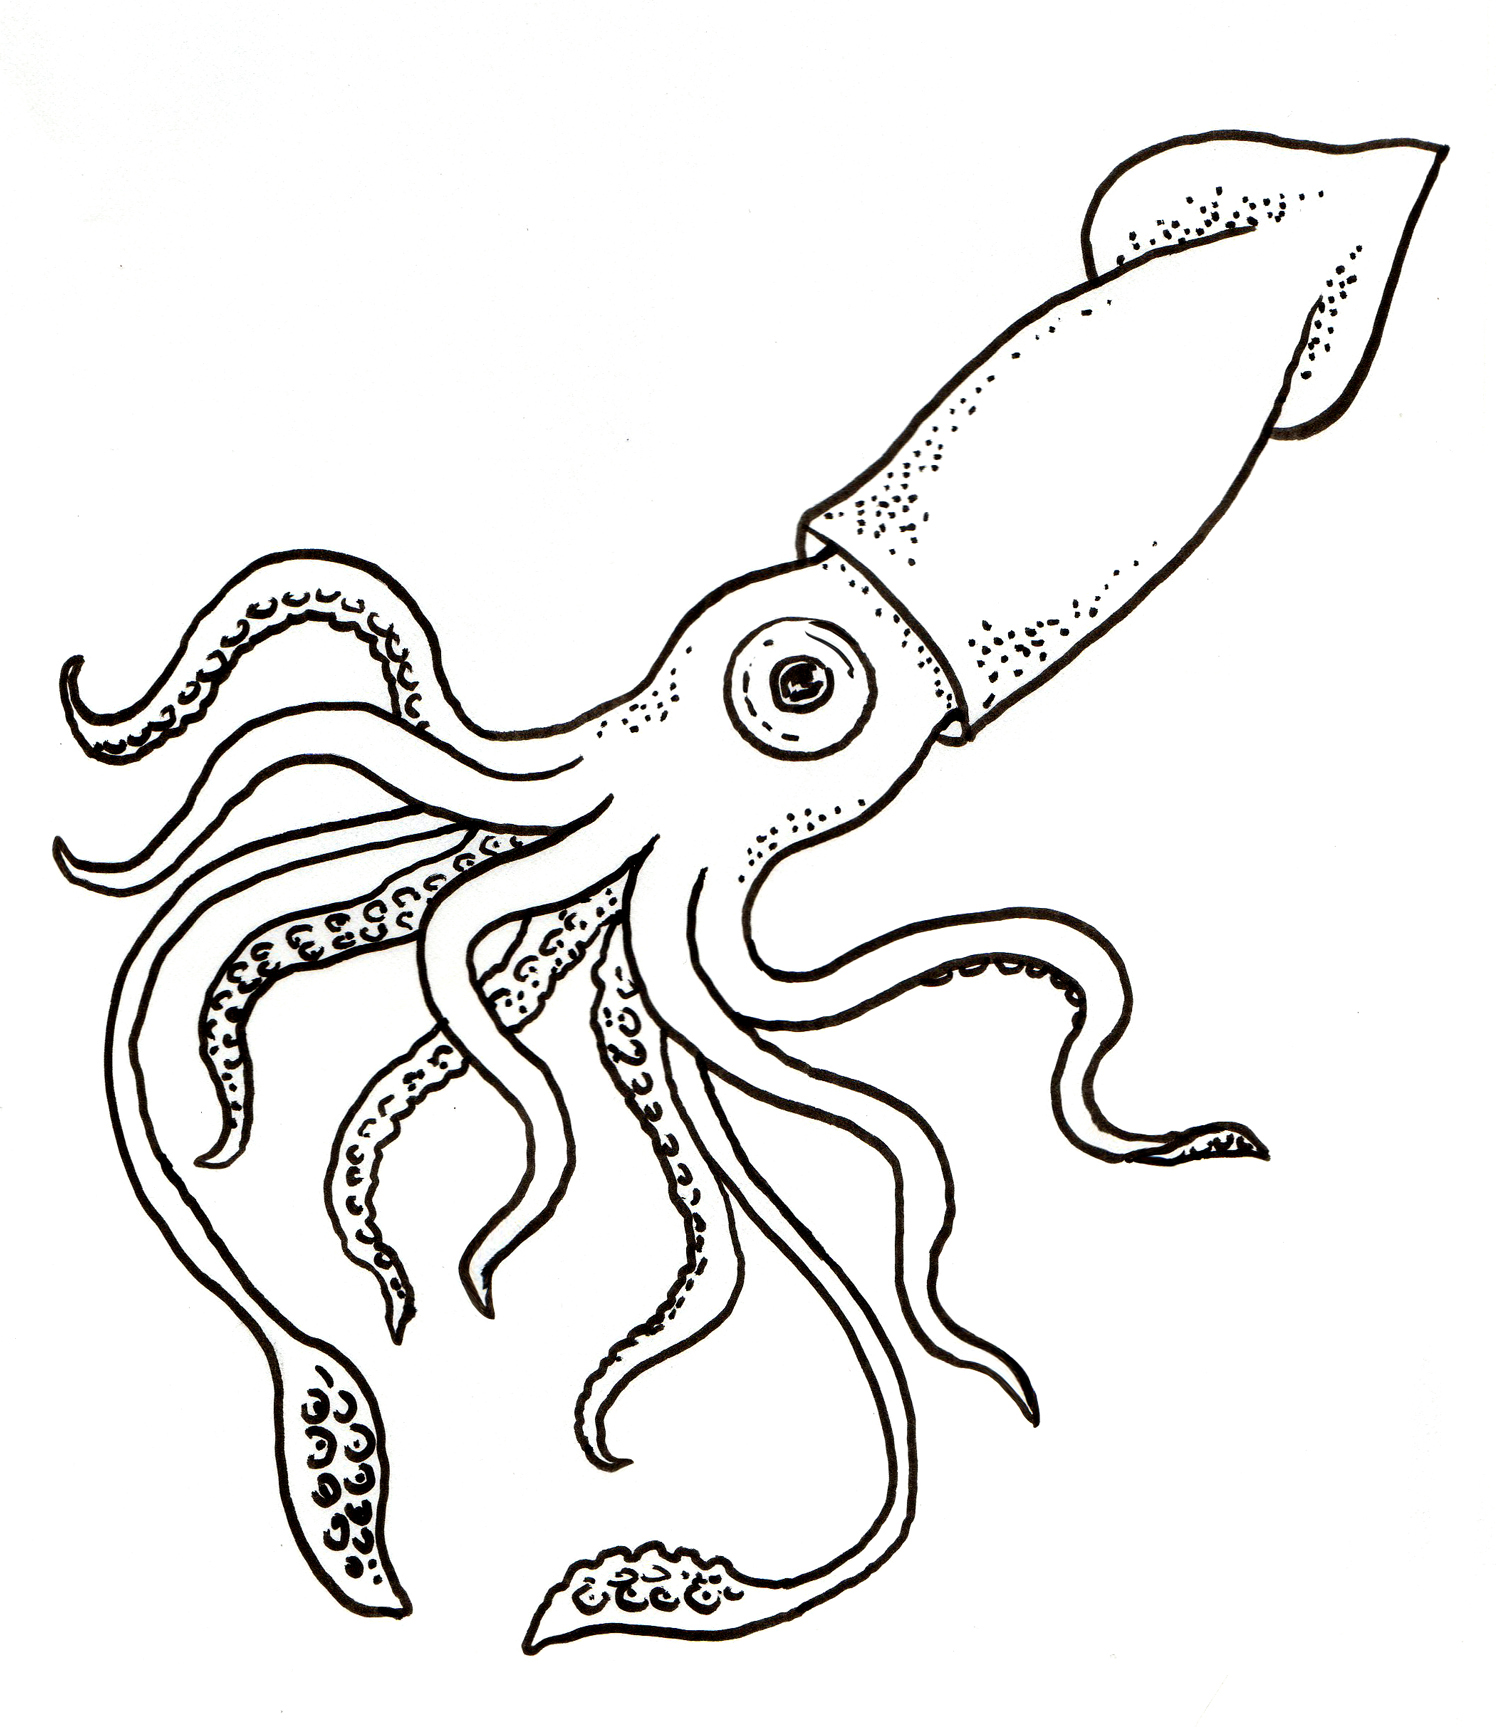 Giant Squid Coloring Page